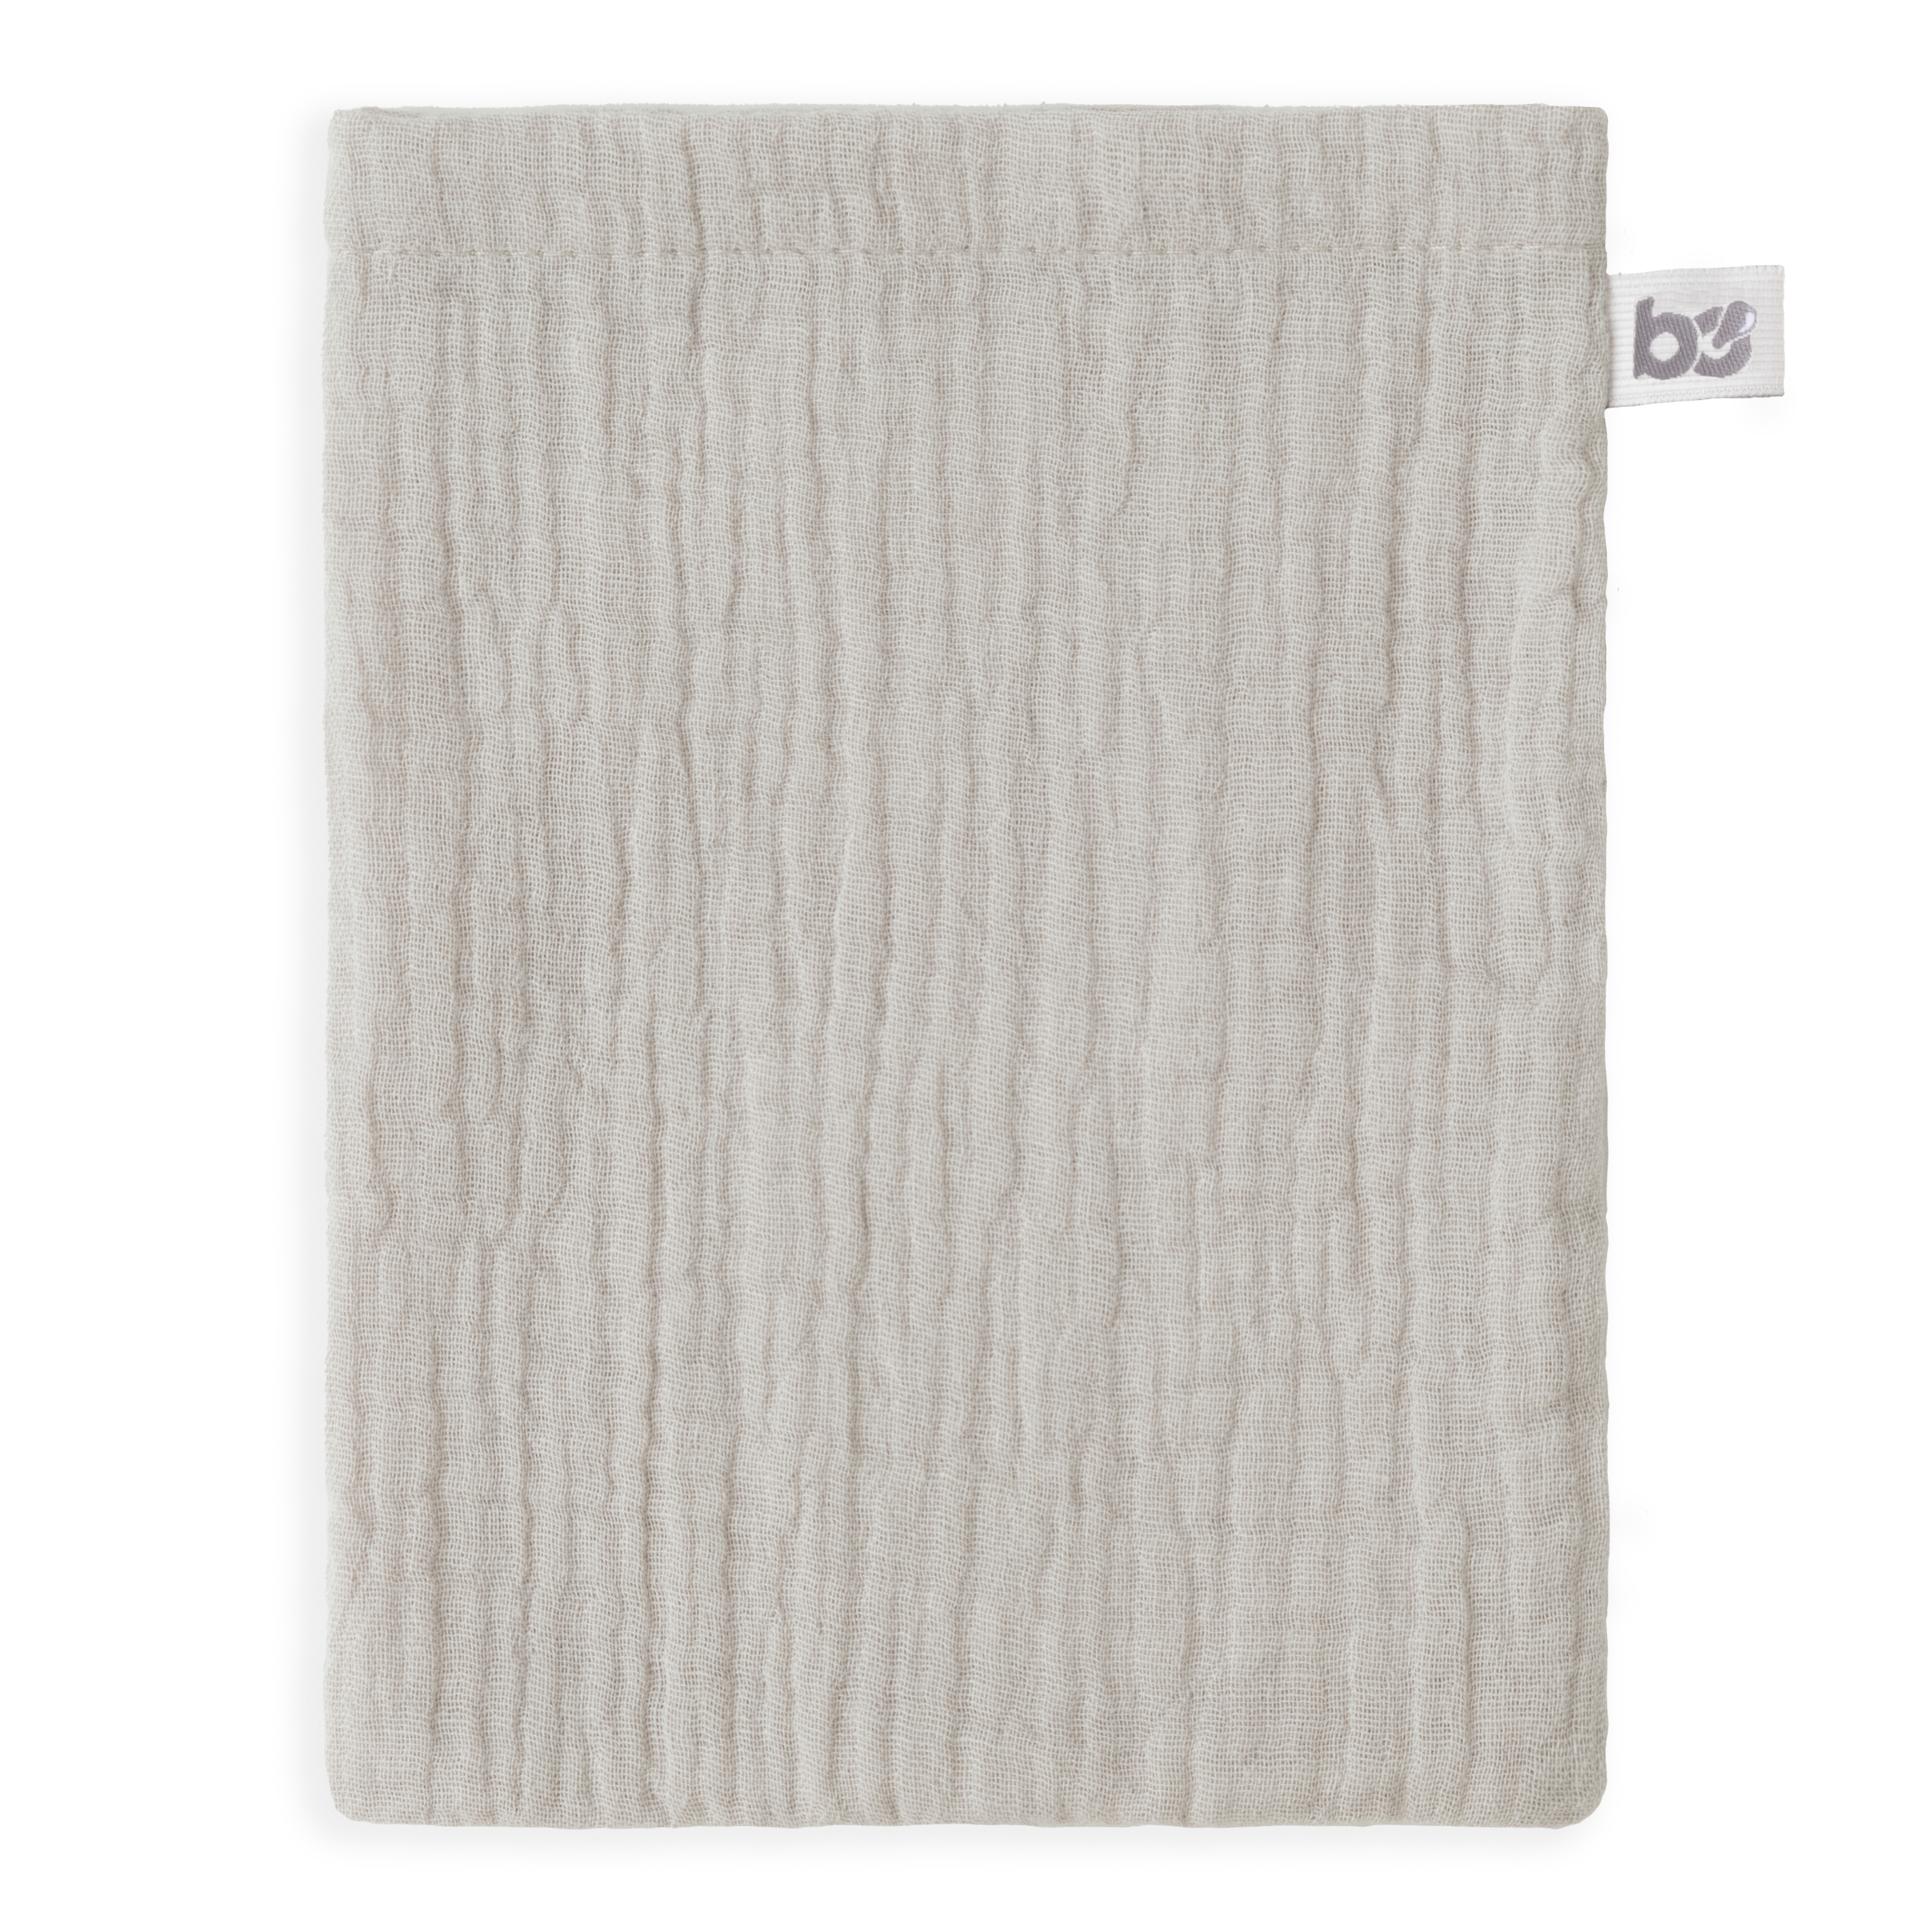 Waschlappen Fresh Eco Stonegreen/Urban Taupe - 3-Pack